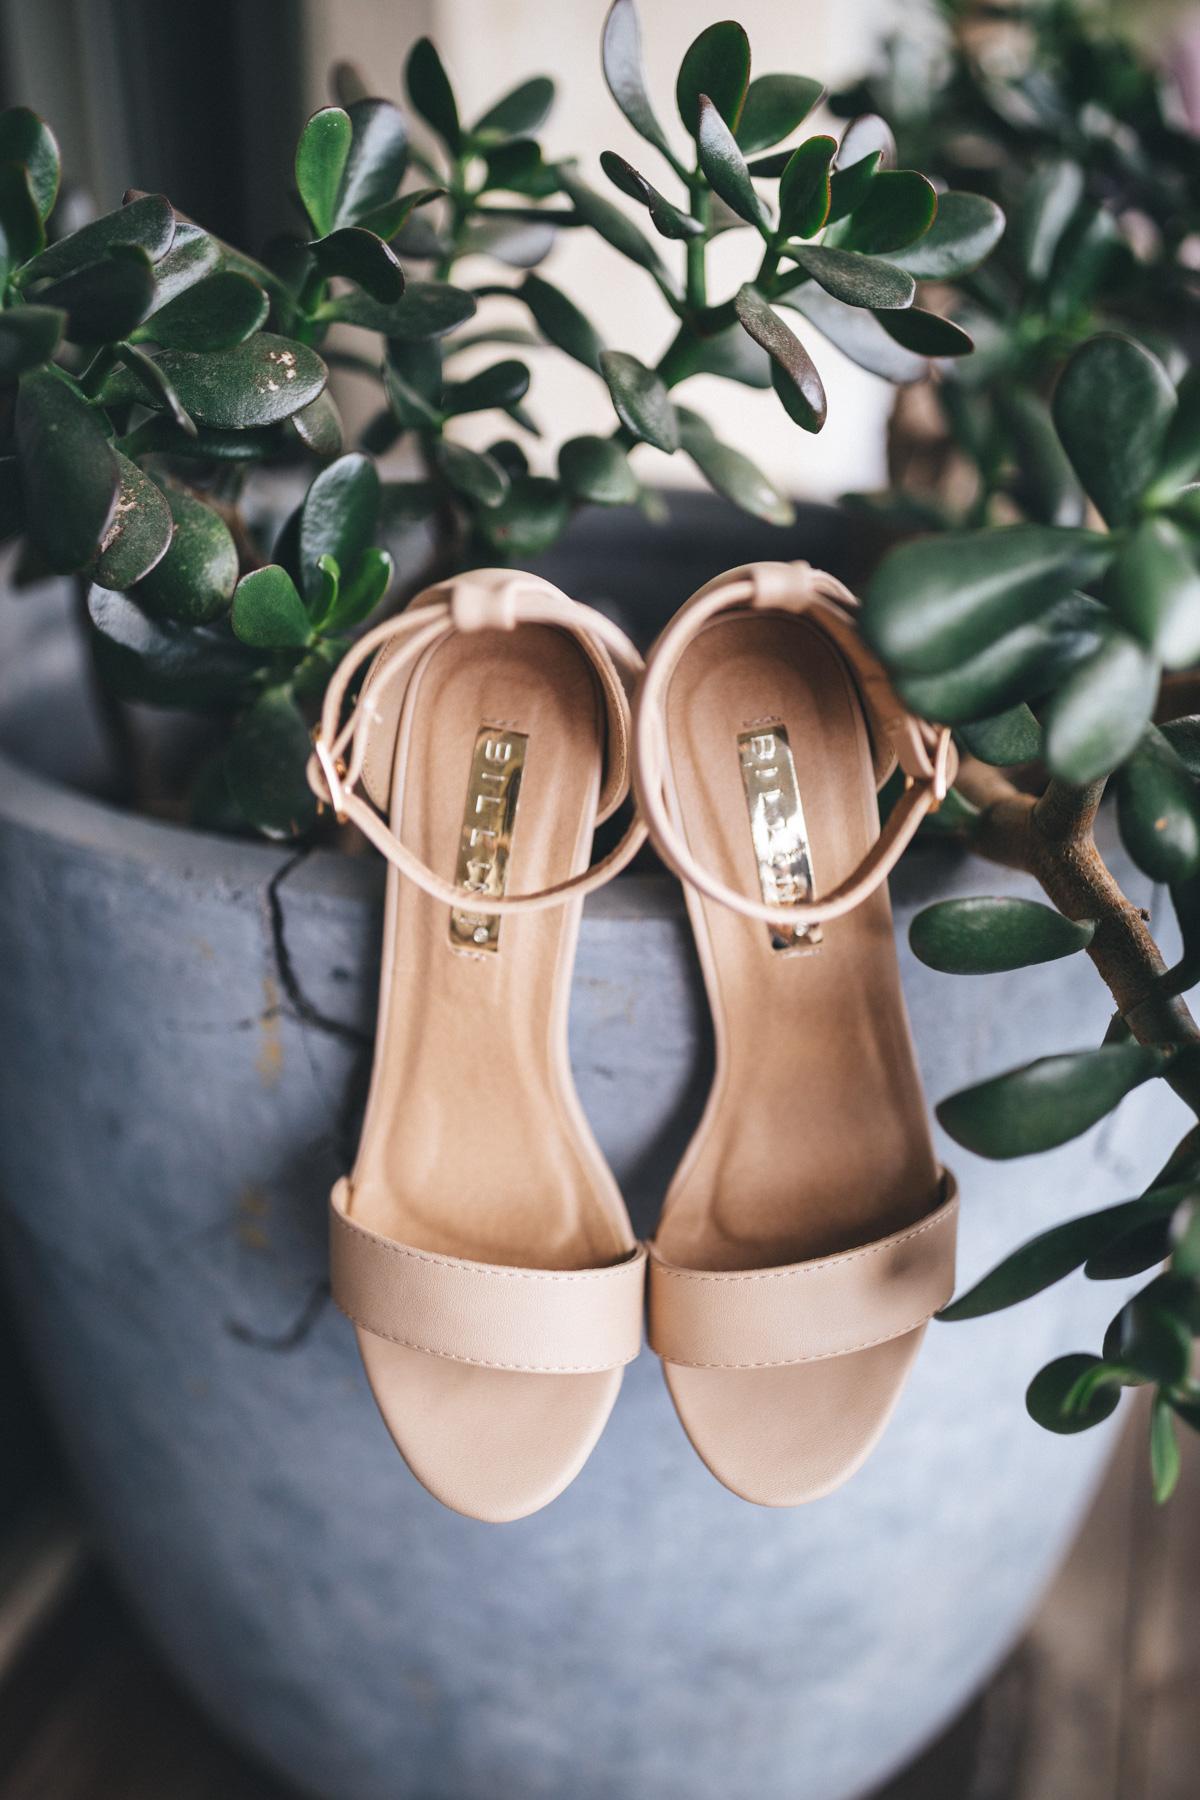 Bridal shoes by Siren Shoes